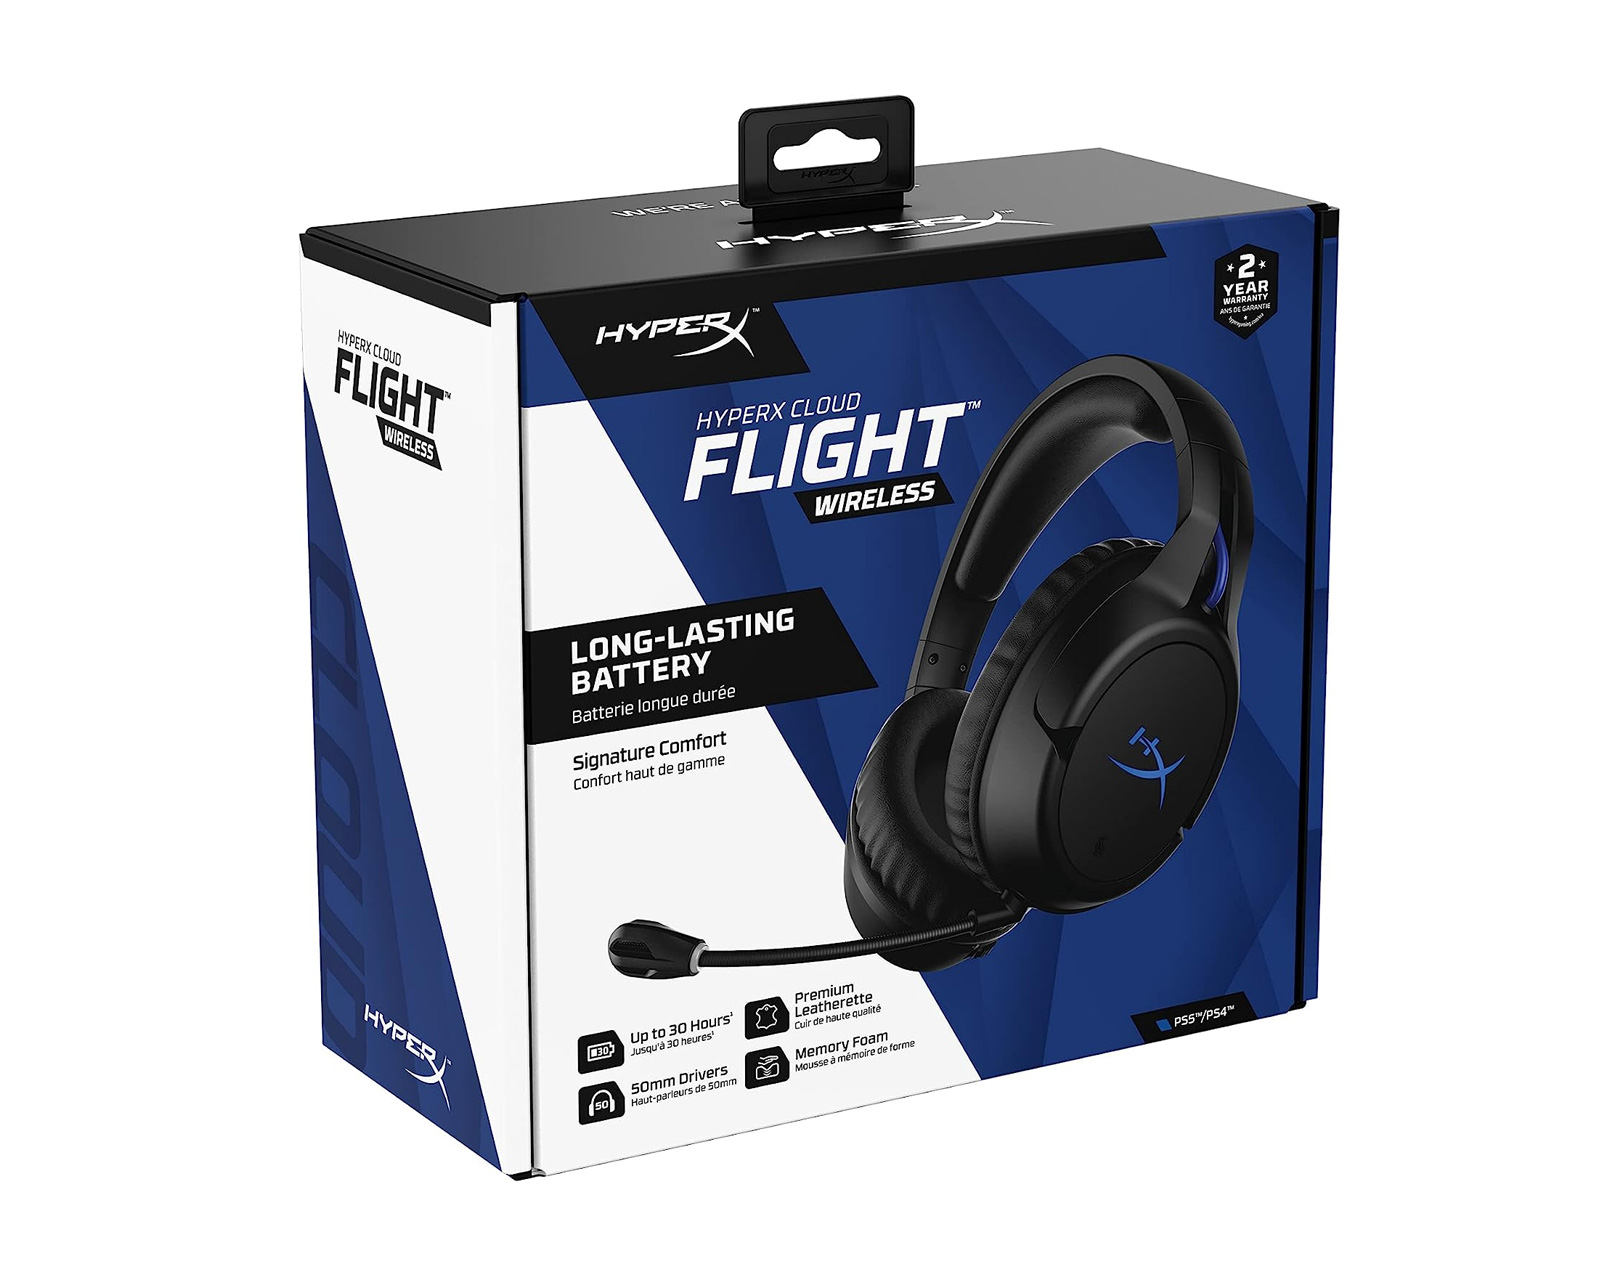 Cloud Flight – Wireless USB Headset for PC and PS4™